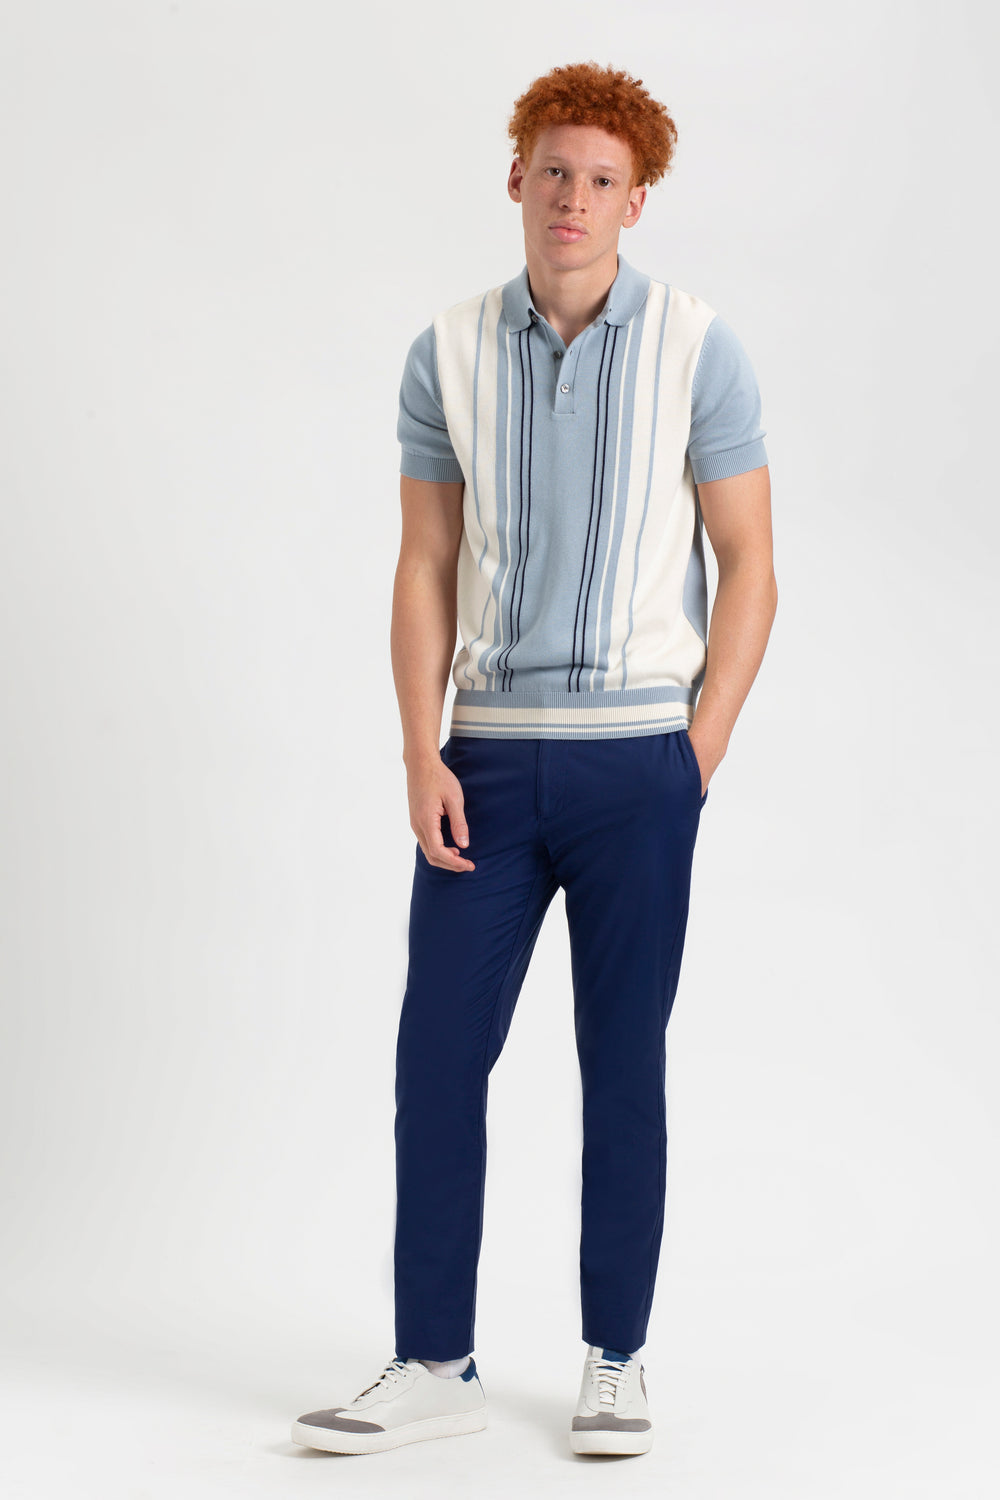 Iconic Vertical Textured Stripe Mod Knit Polo - Light Blue